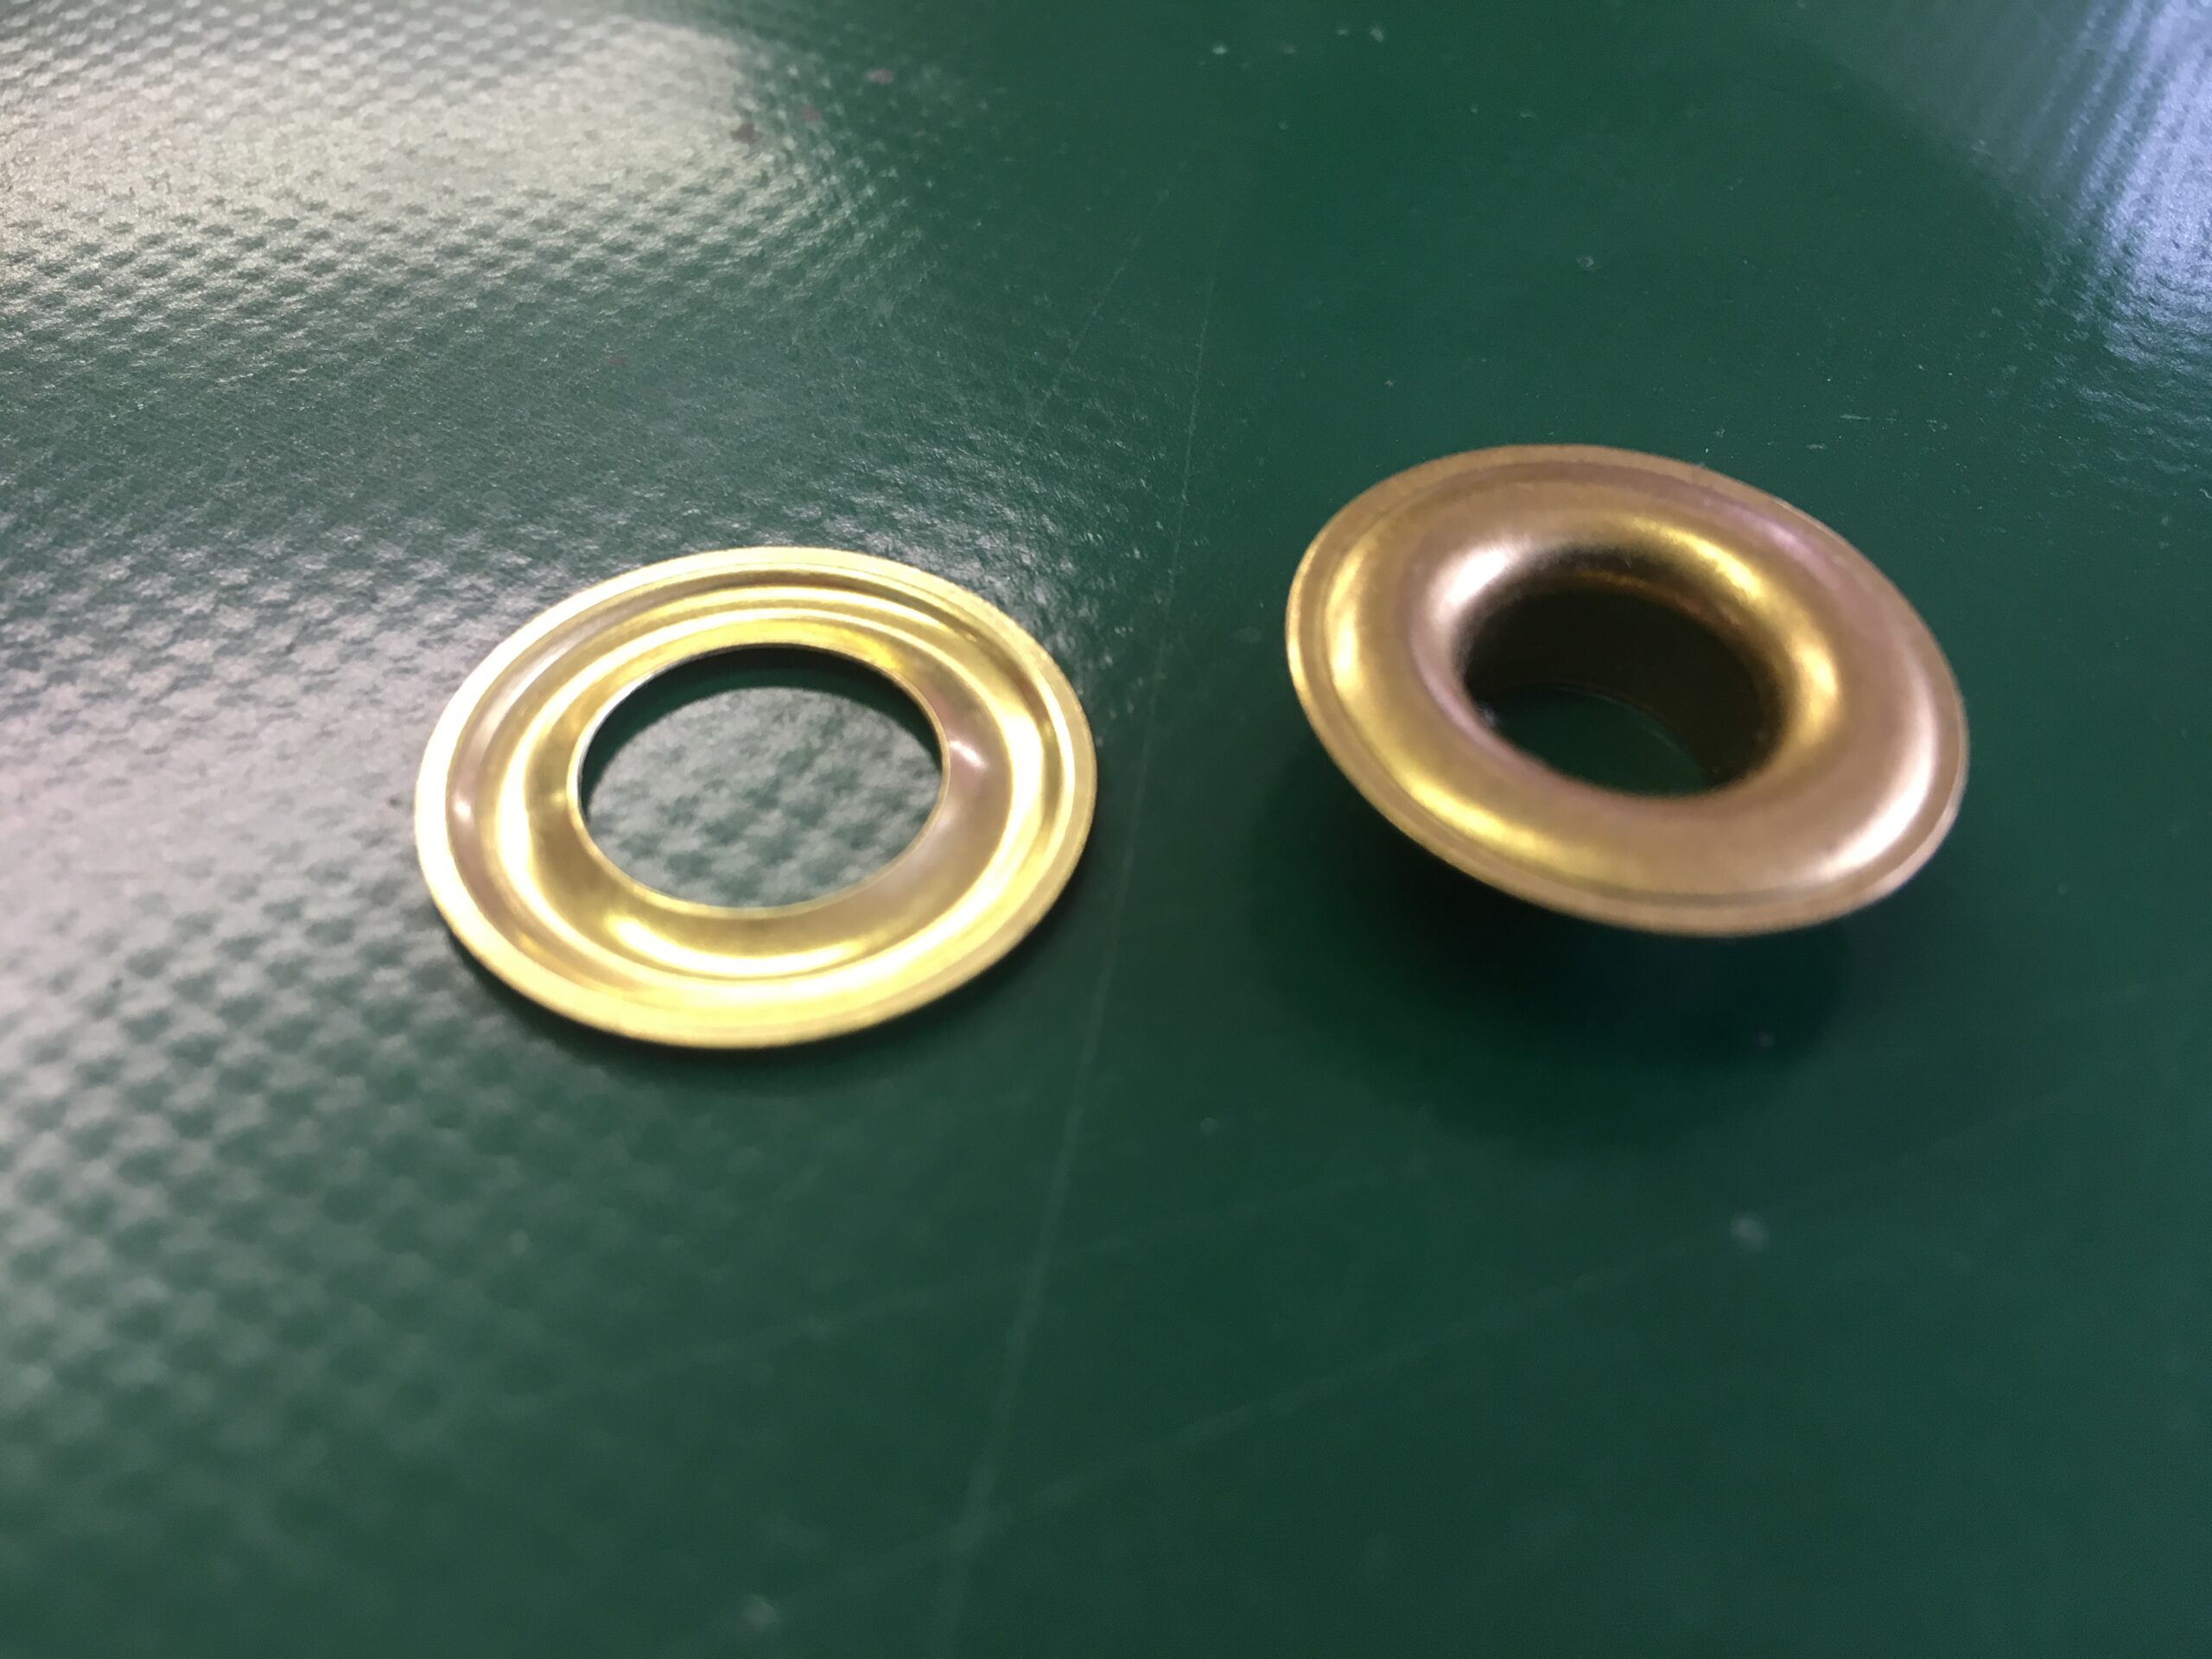 Sheet grommet with plain washer